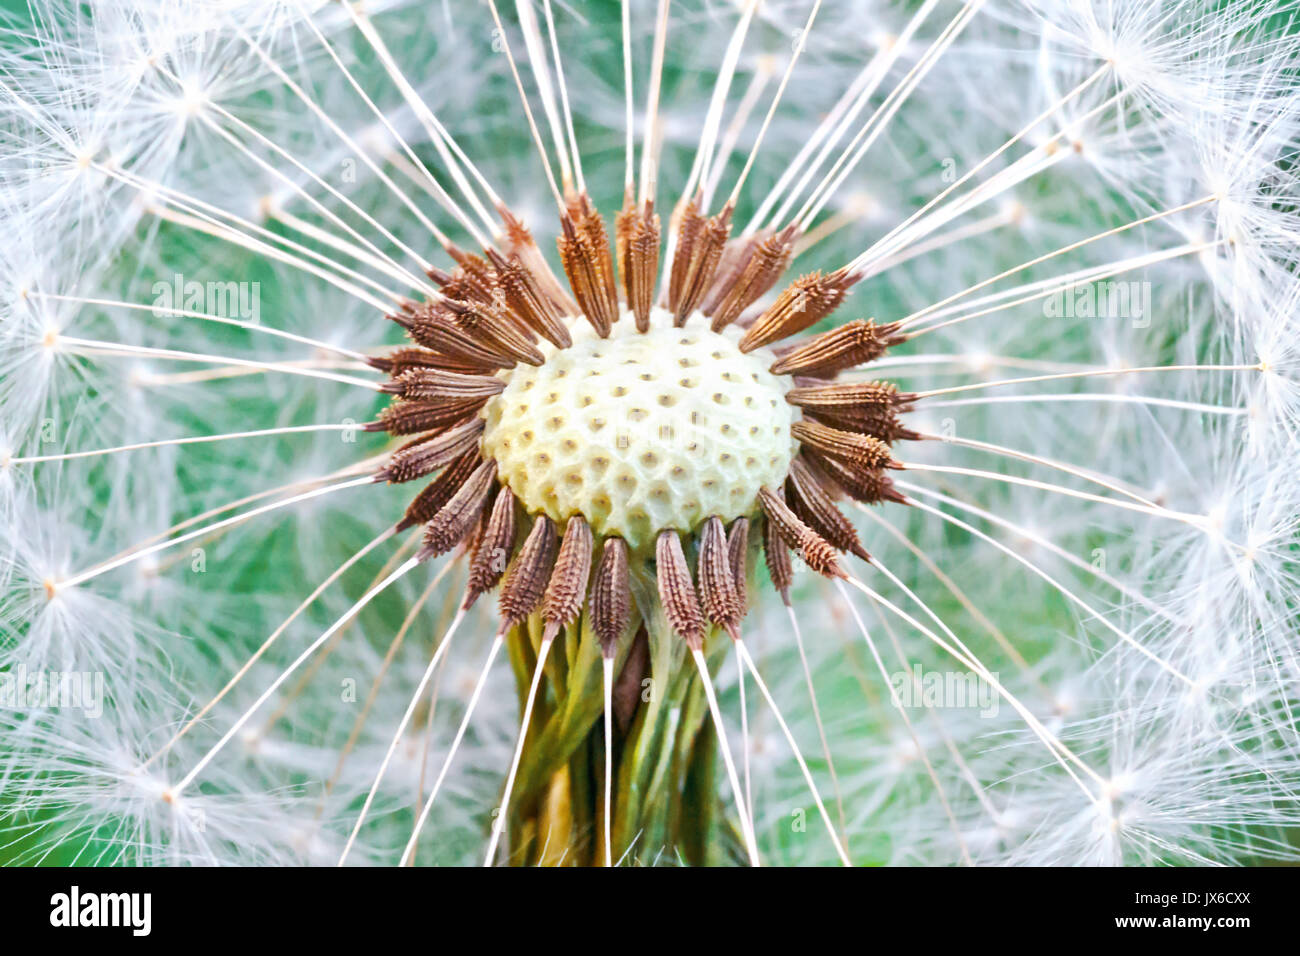 Dandelion seed head. Abstract dandelion flower background, extreme closeup (Macro) with soft focus, beautiful nature details. Soft dreamy tender artis Stock Photo